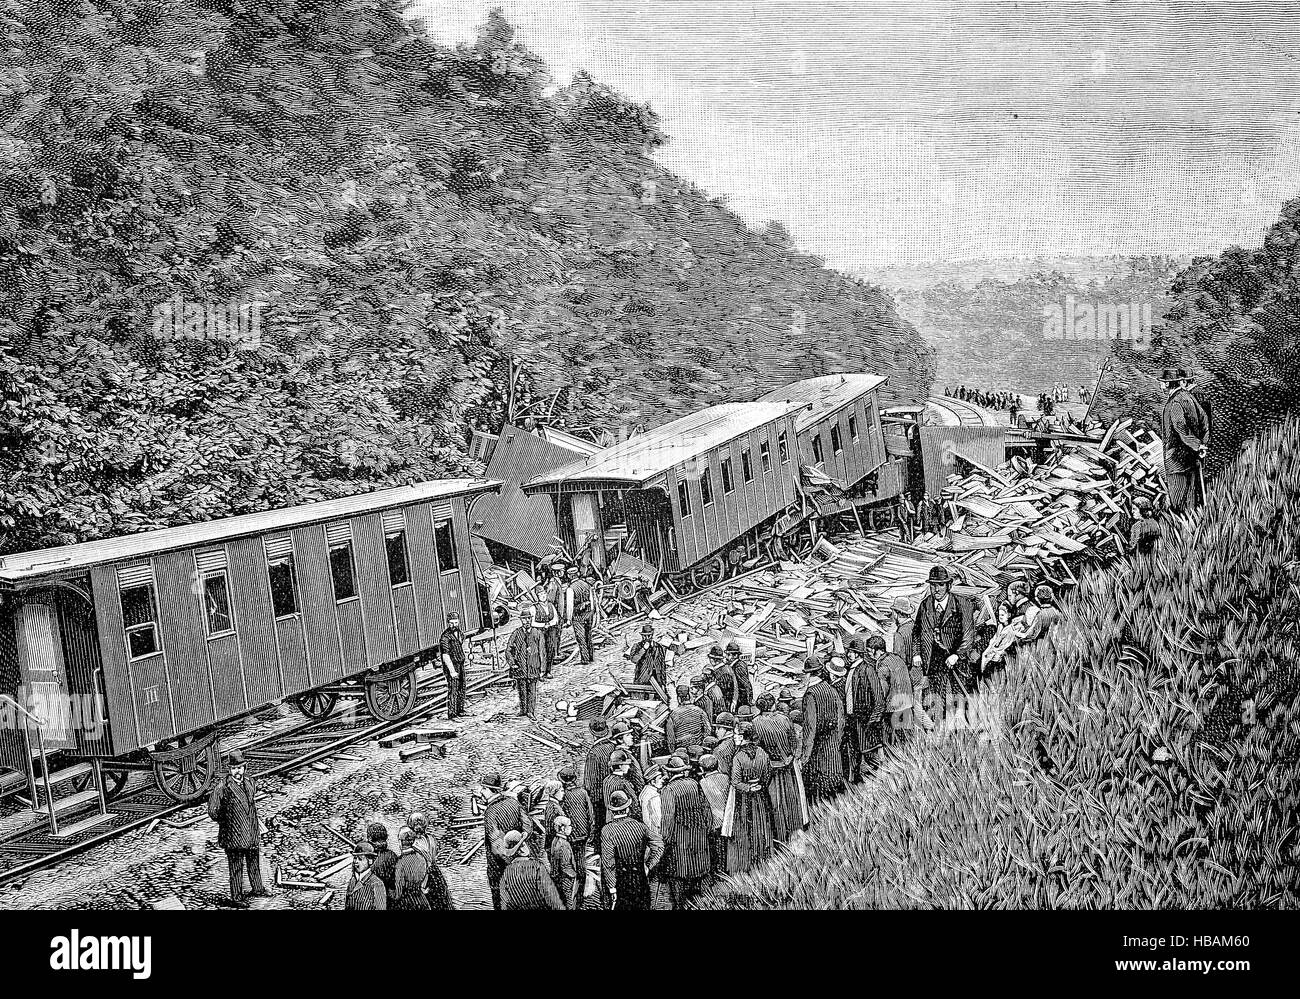 the big train sccident near Vaihingen, Germany, hictorical illustration from 1880 Stock Photo